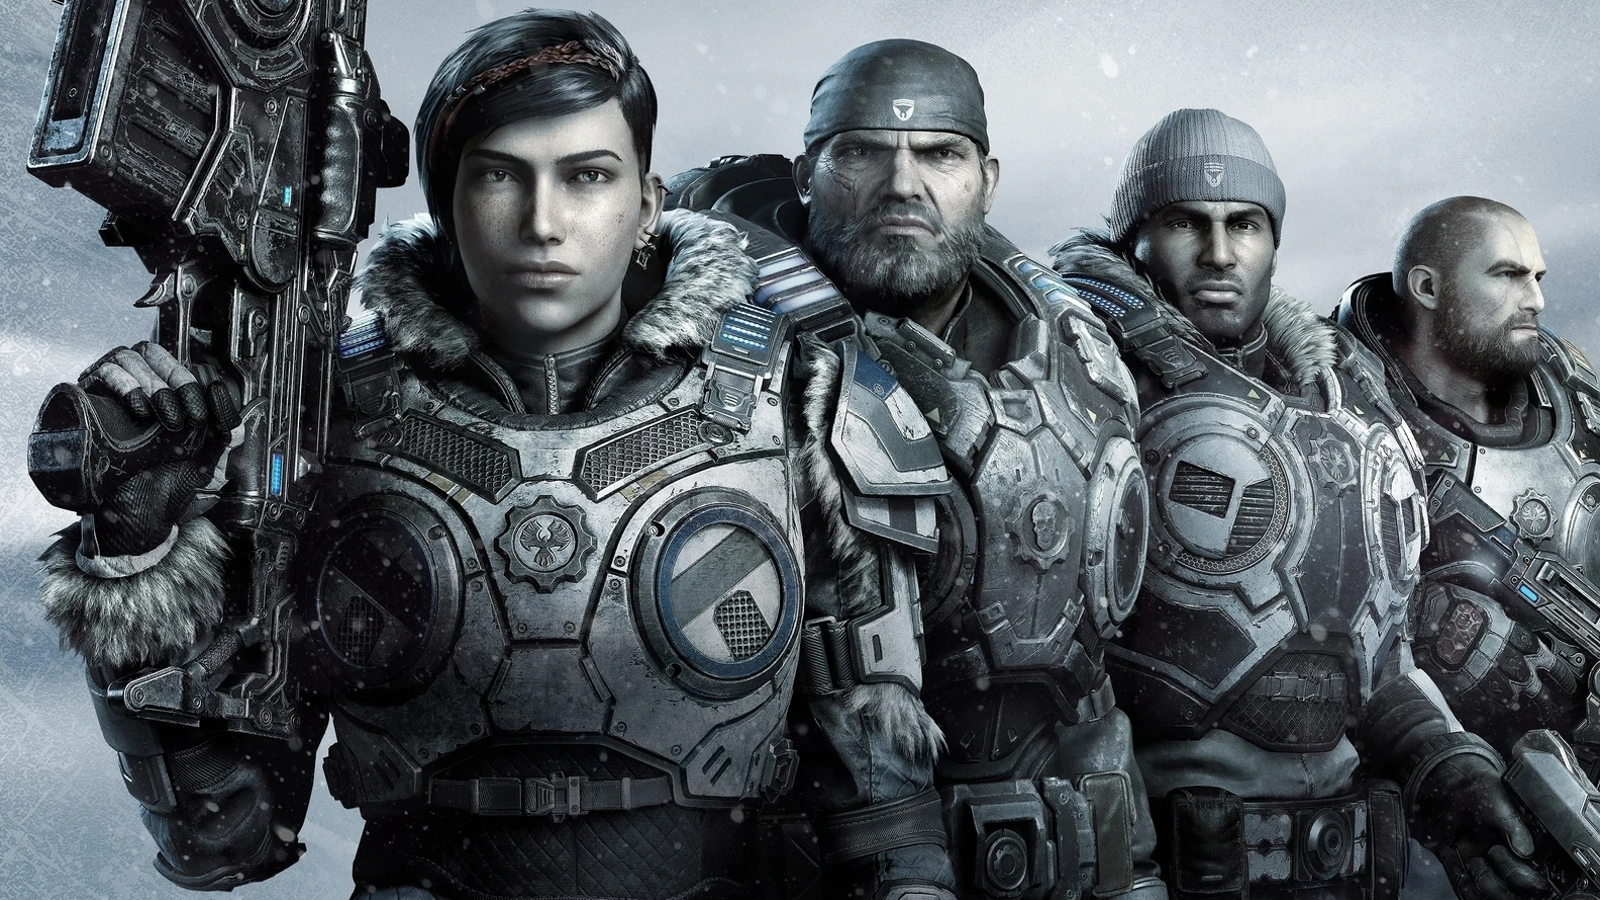 The Coalition Will Talk About Gears 5 on Xbox Series X This Thursday During  Inside Unreal Livestream